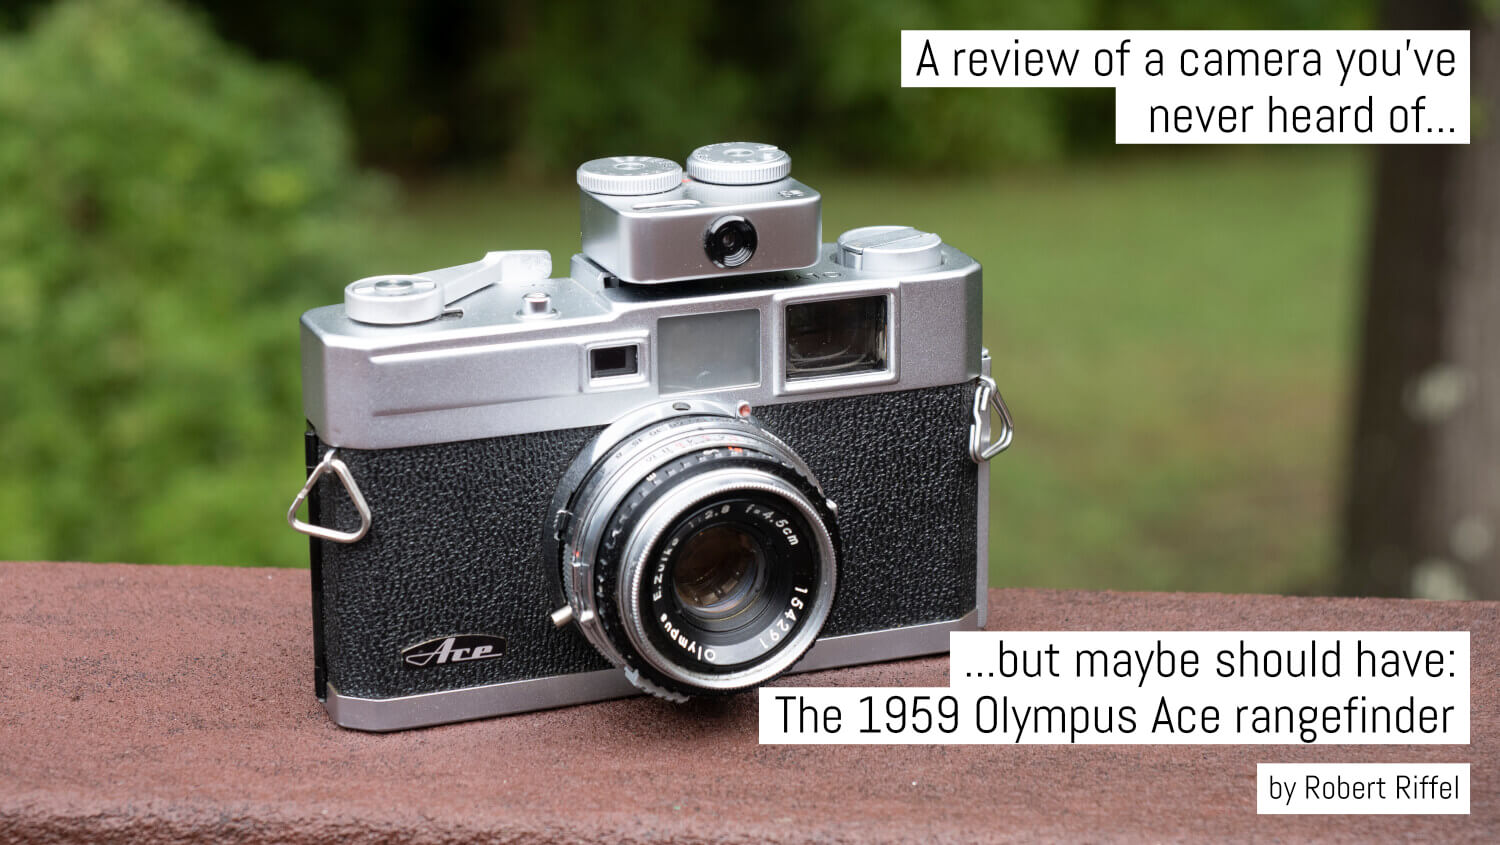 A review of a camera you’ve never heard of… but maybe should have: The 1959 Olympus Ace rangefinder